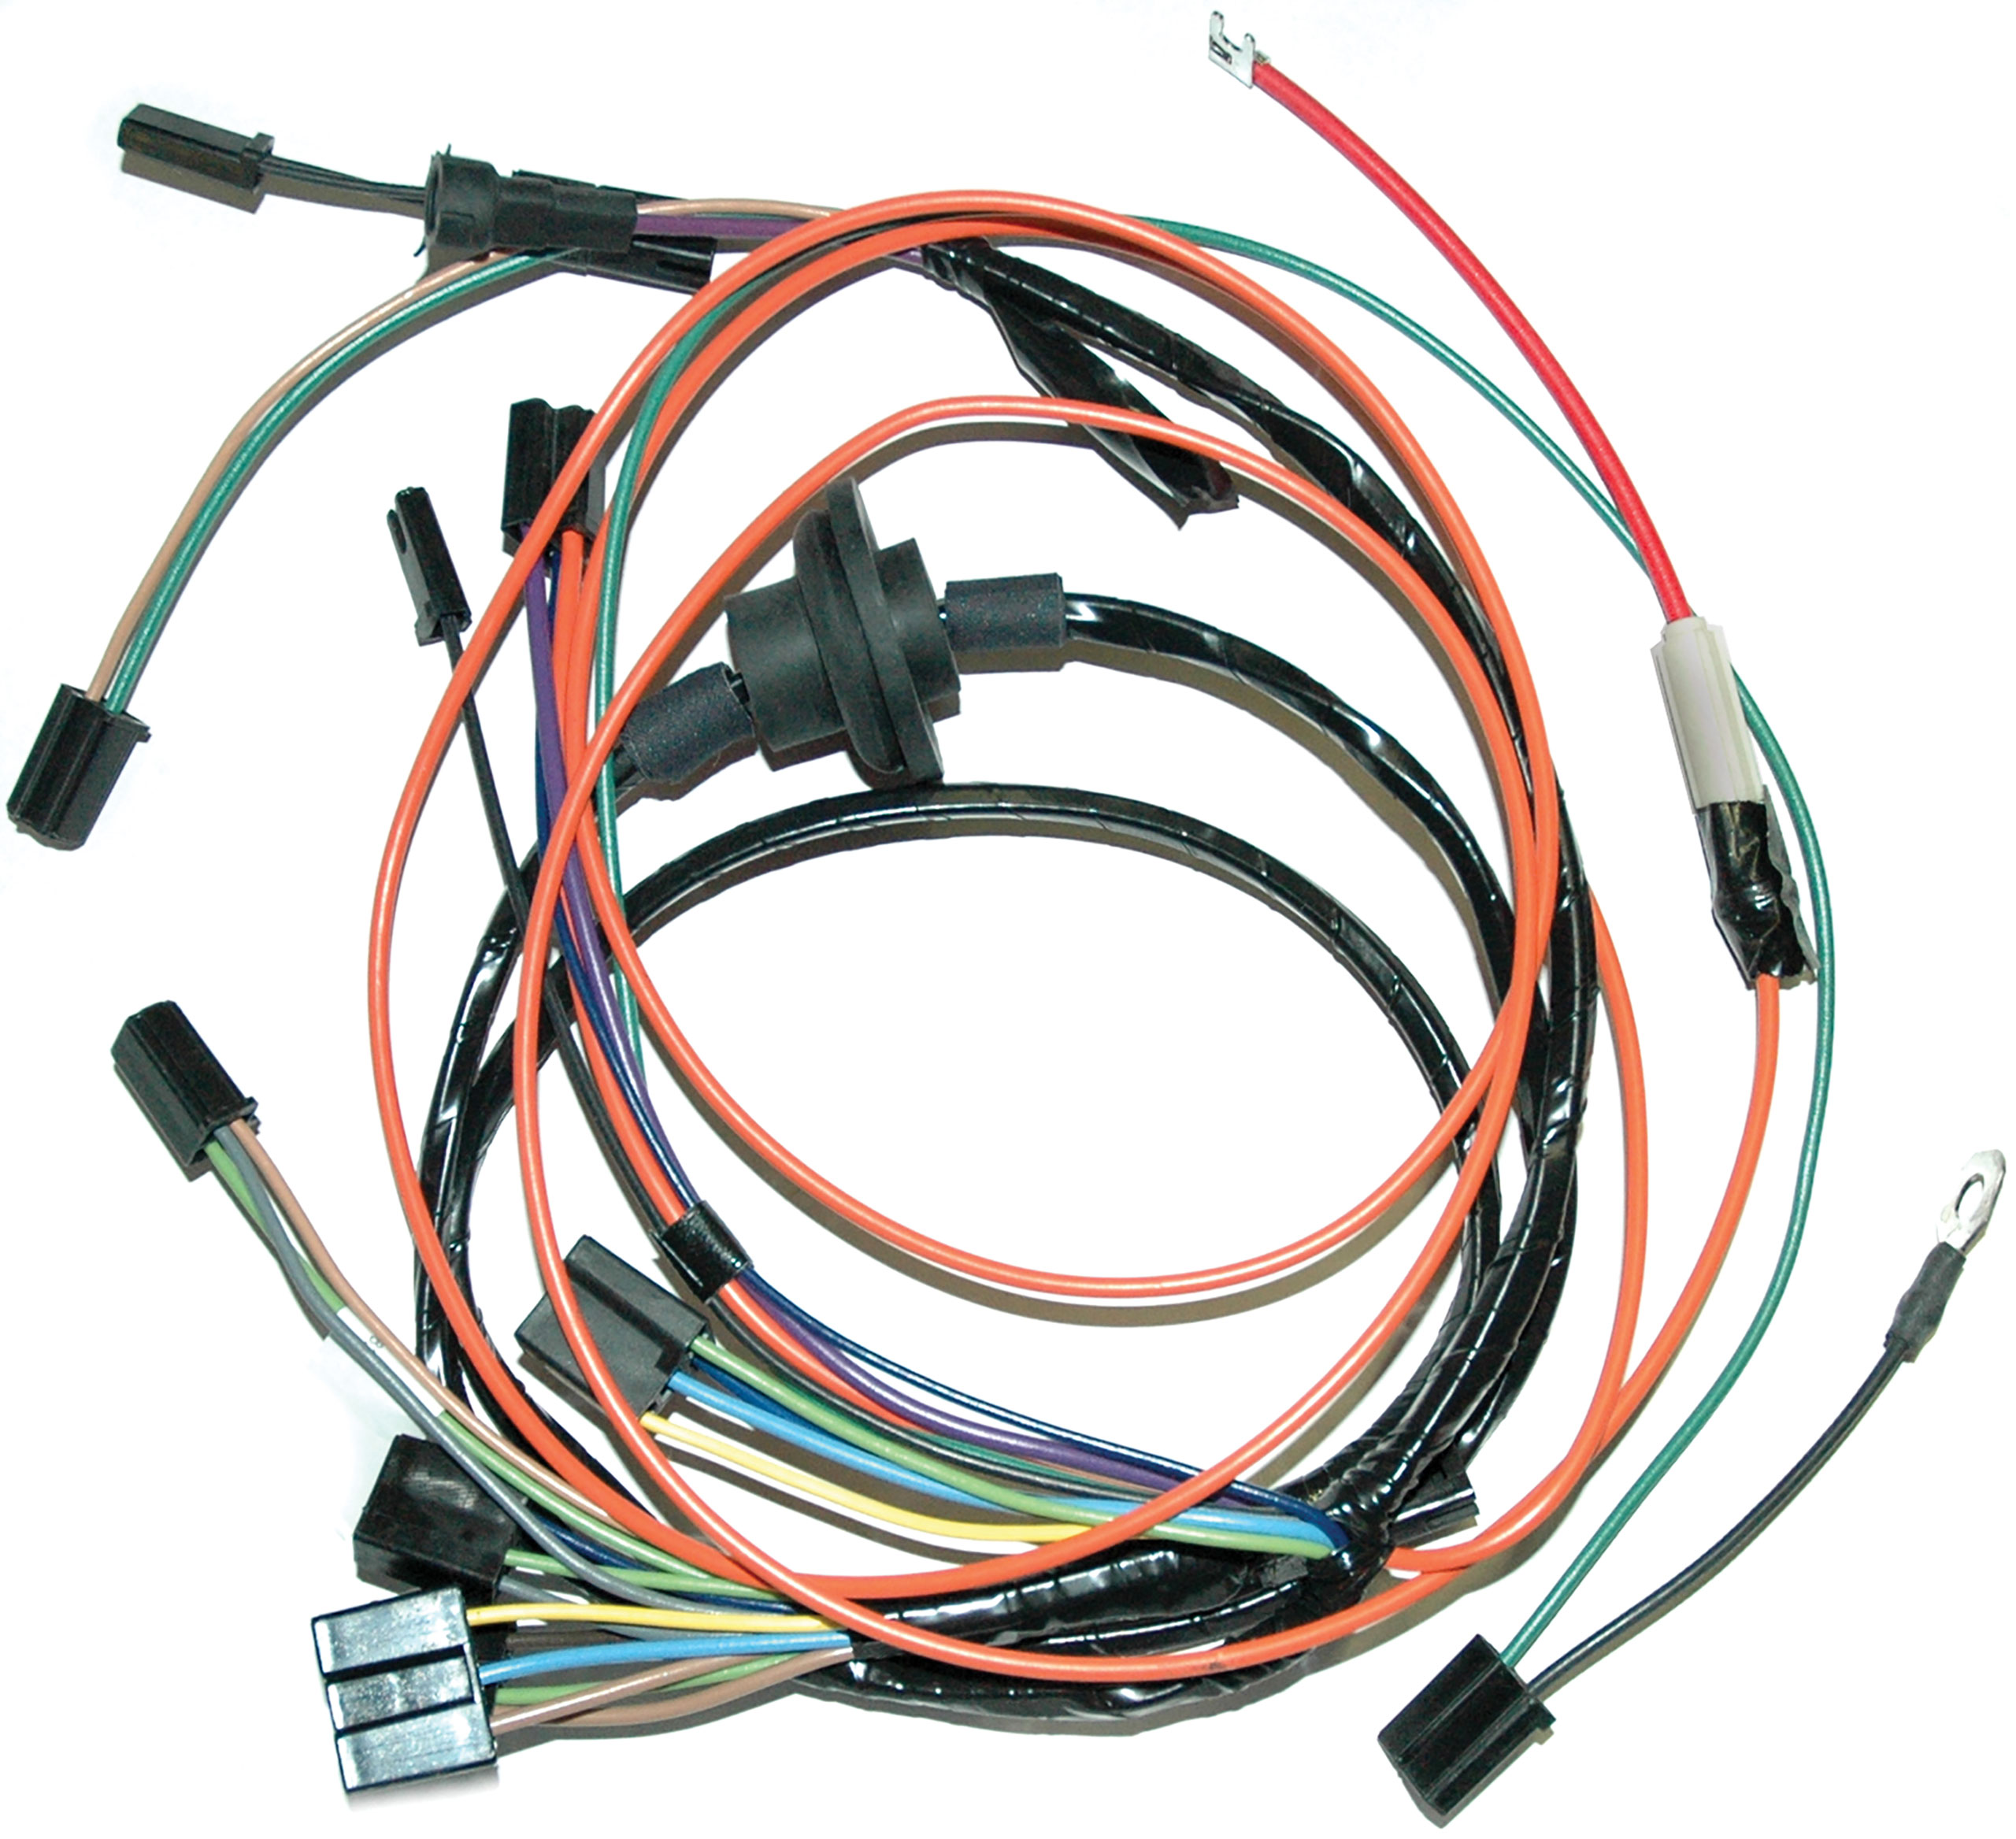 C3 1969-1970 Chevrolet Corvette Harness. Air Conditioning W/Heater Wiring - Lectric Limited, Inc.